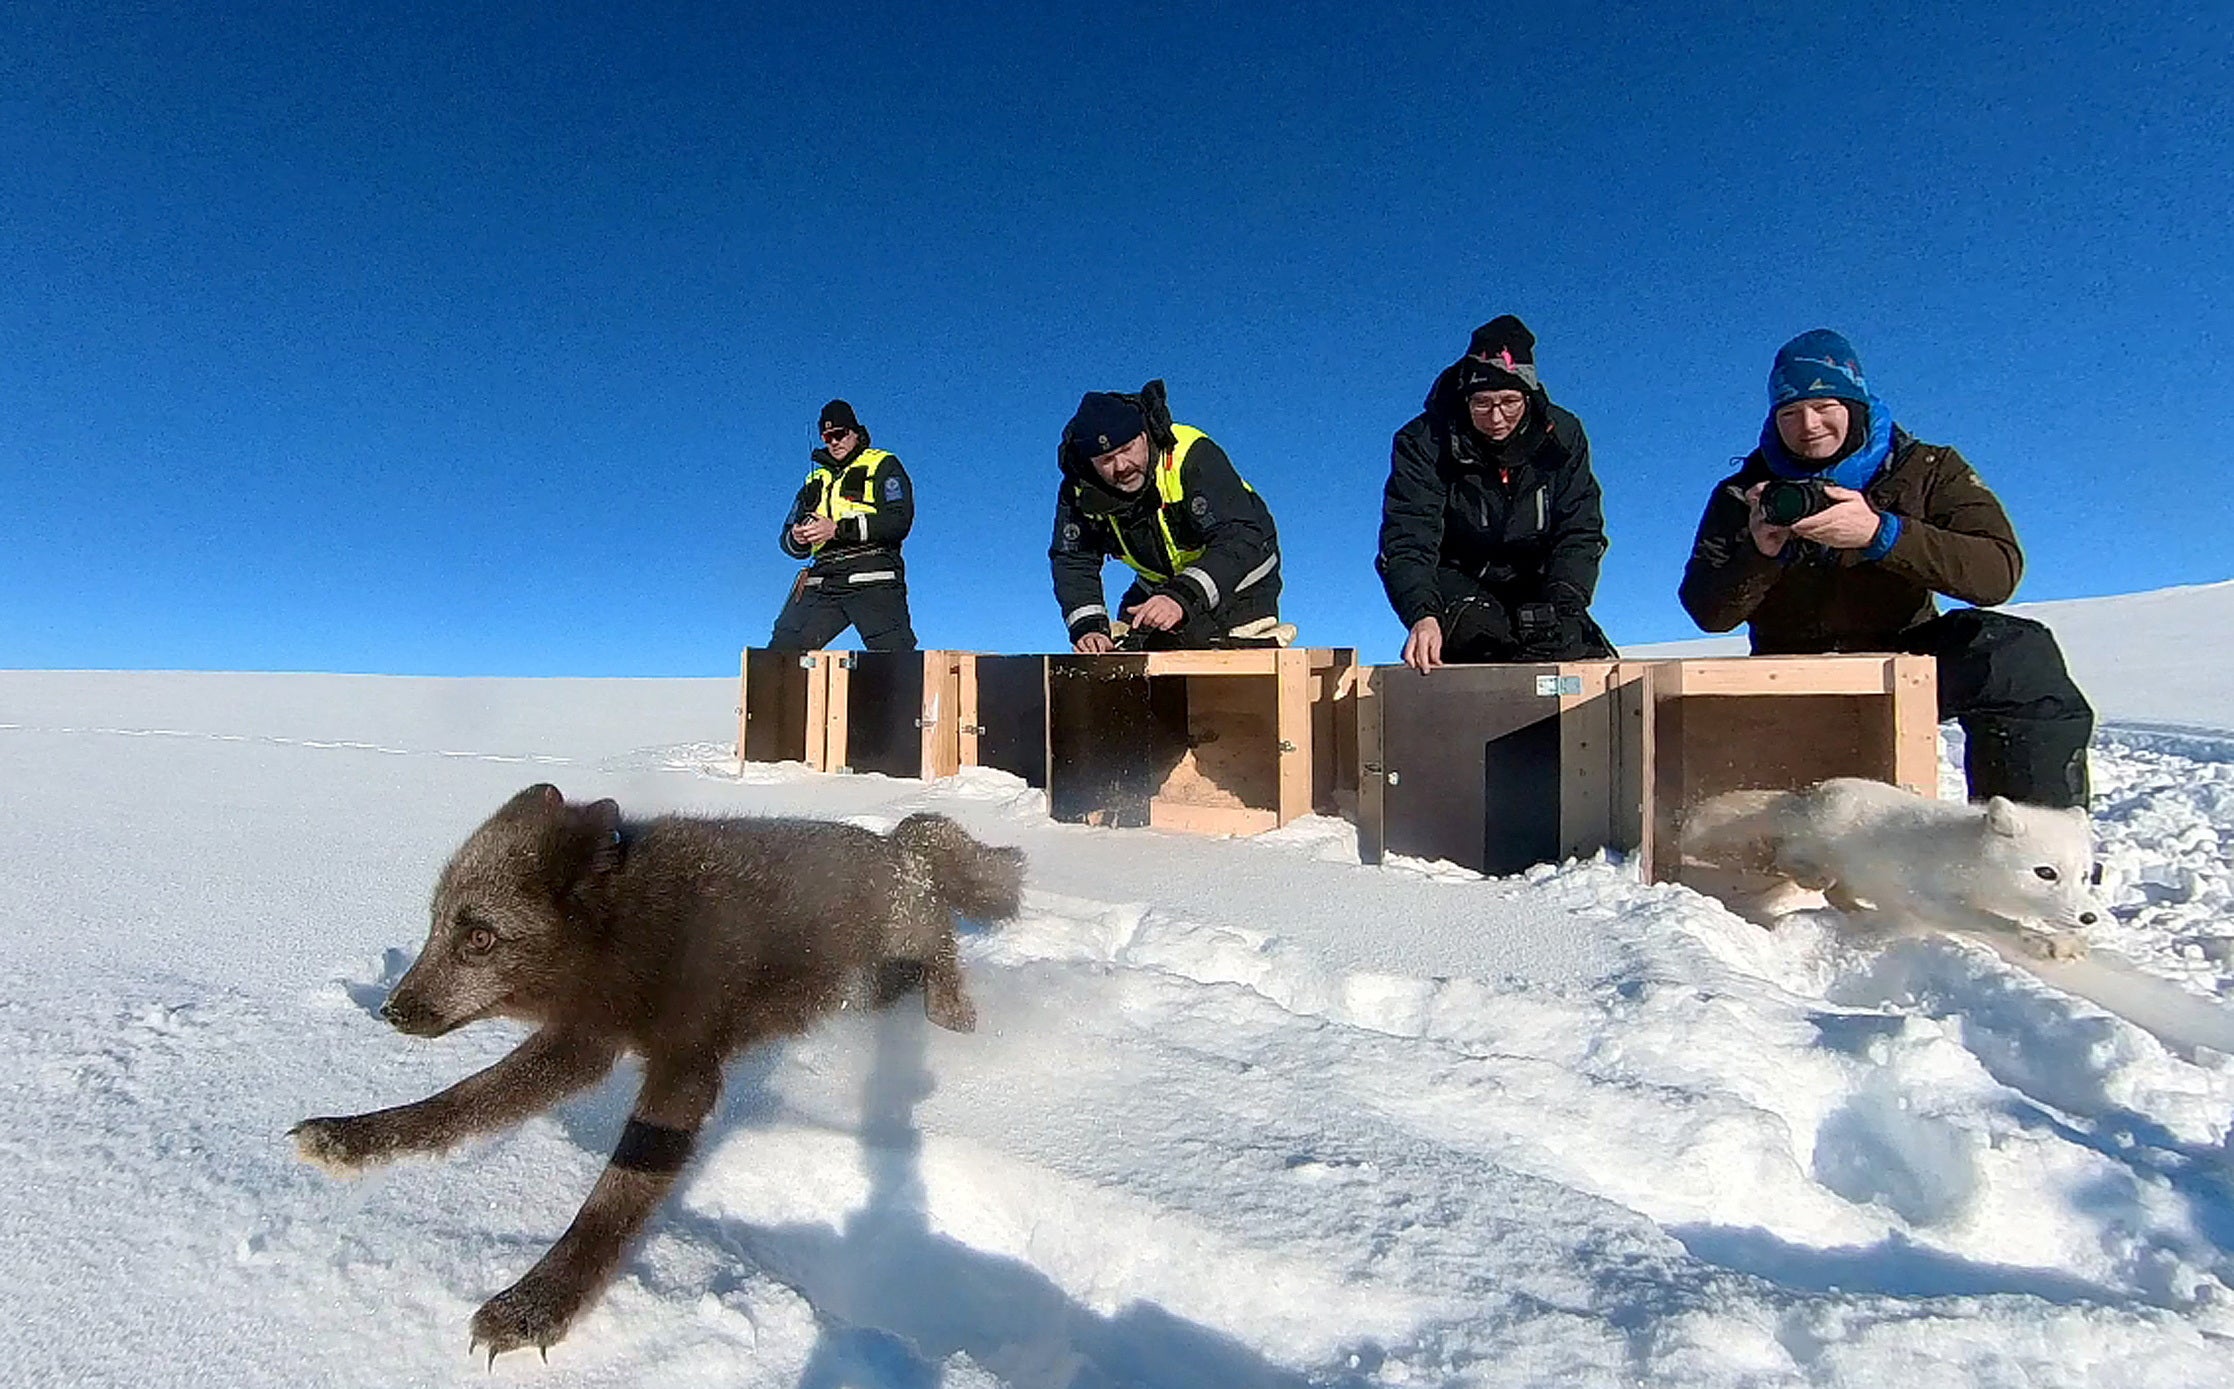 Conservation biologists Kristine Ulvund and Craig Jackson, and park rangers Olaf Bratland and Harald Normann Andersen release a blue and a white Arctic fox into the wild